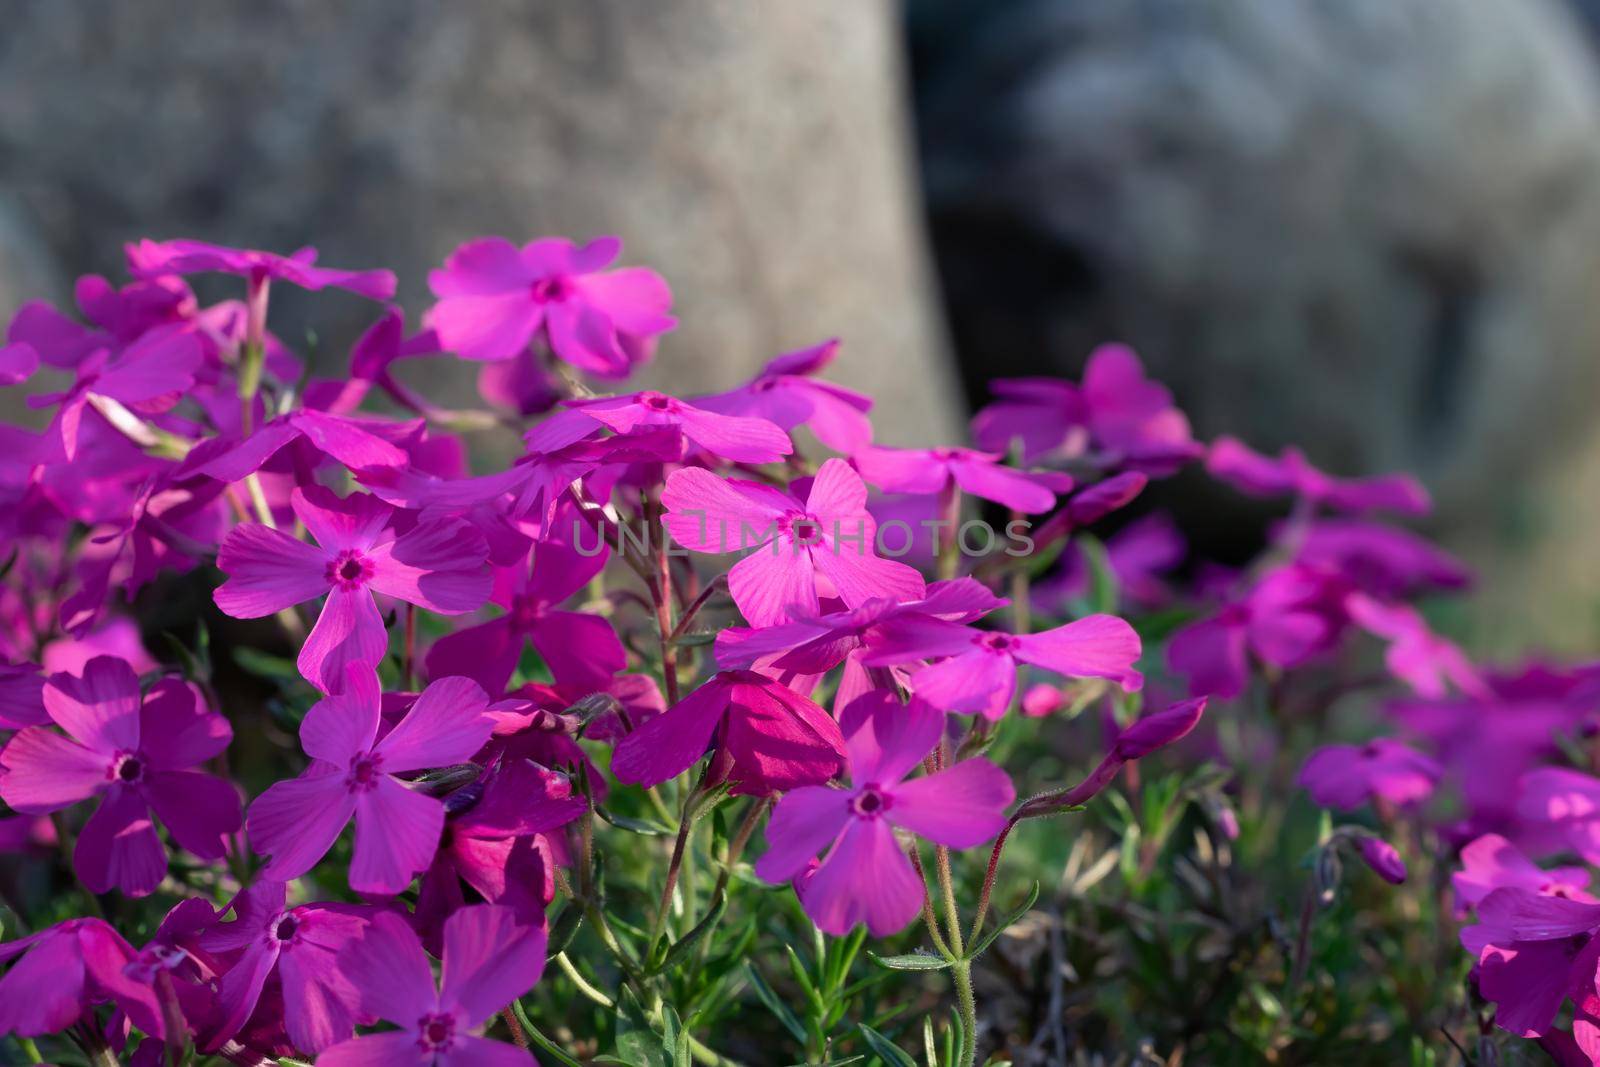 Dark pink flowers of a groundcover phlox subulate.